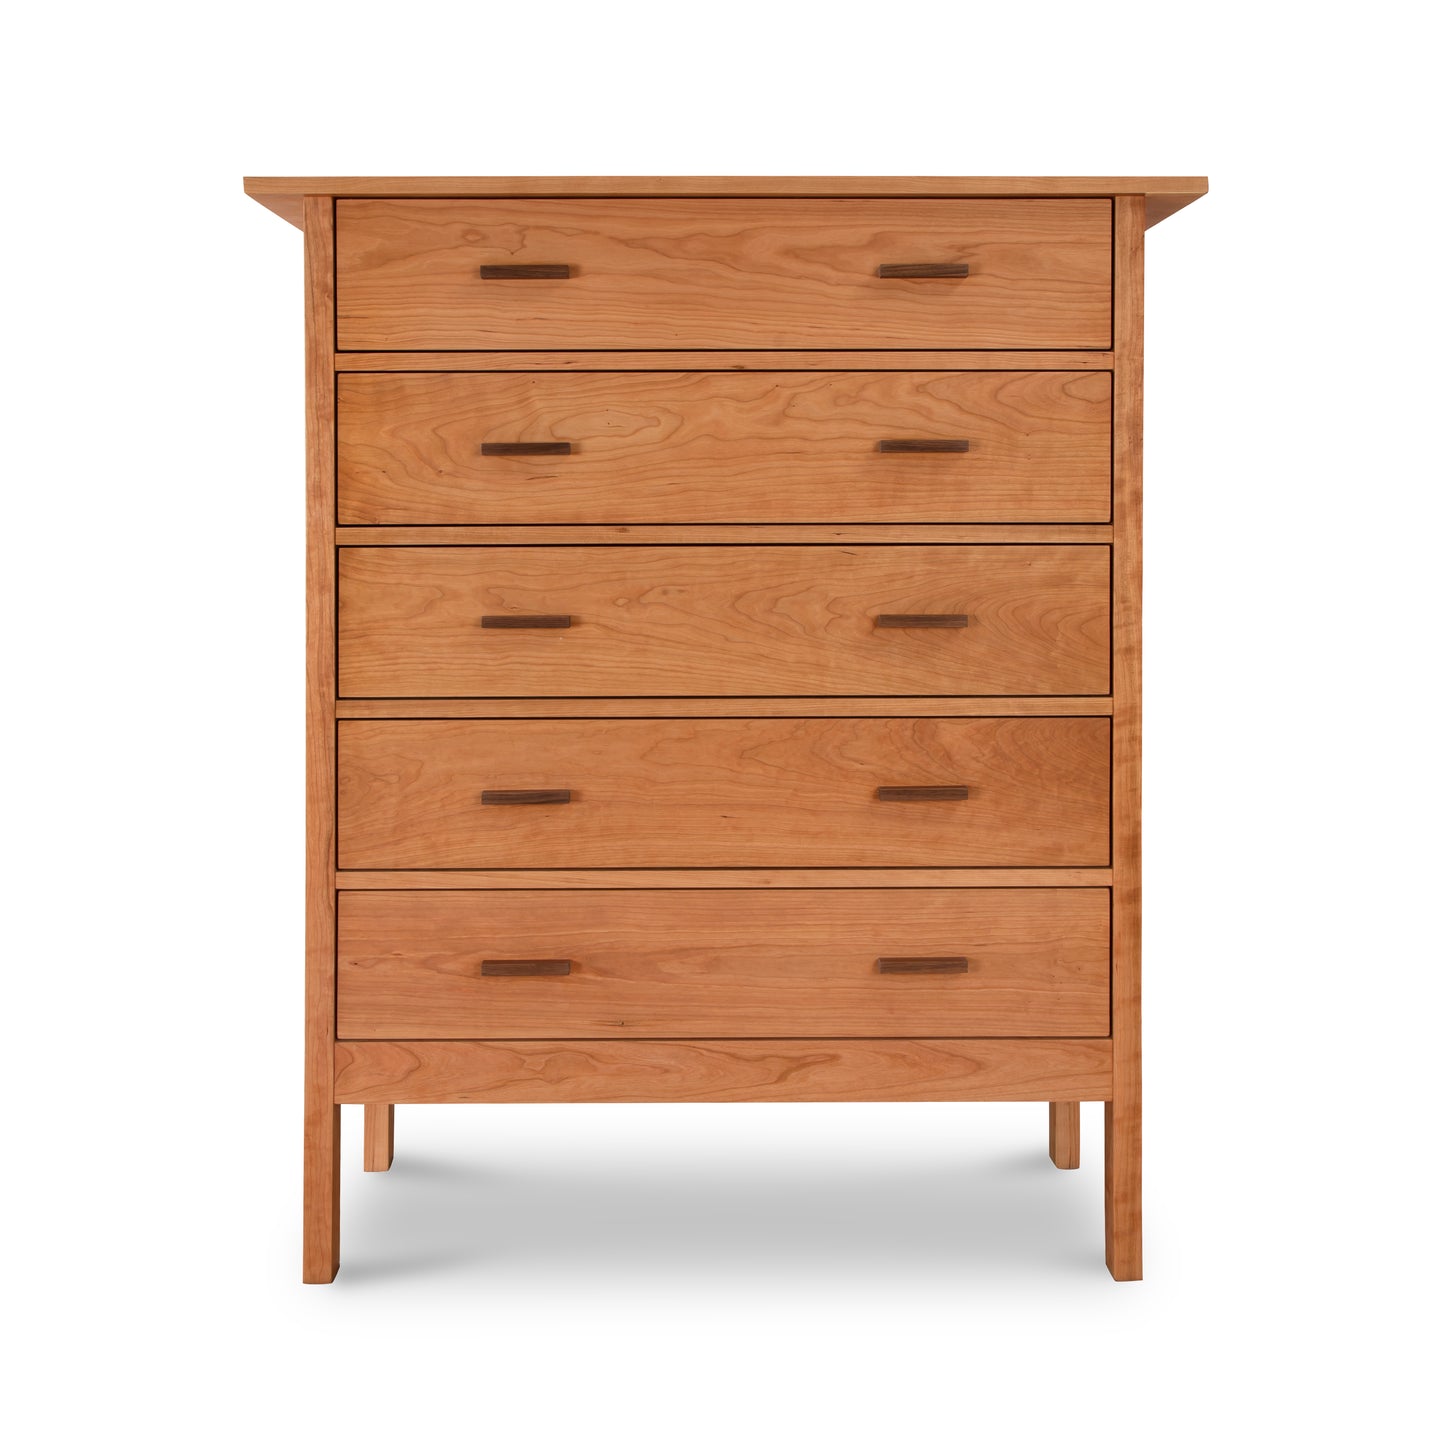 A Modern Craftsman 5-Drawer Chest by Vermont Furniture Designs standing against a white background.